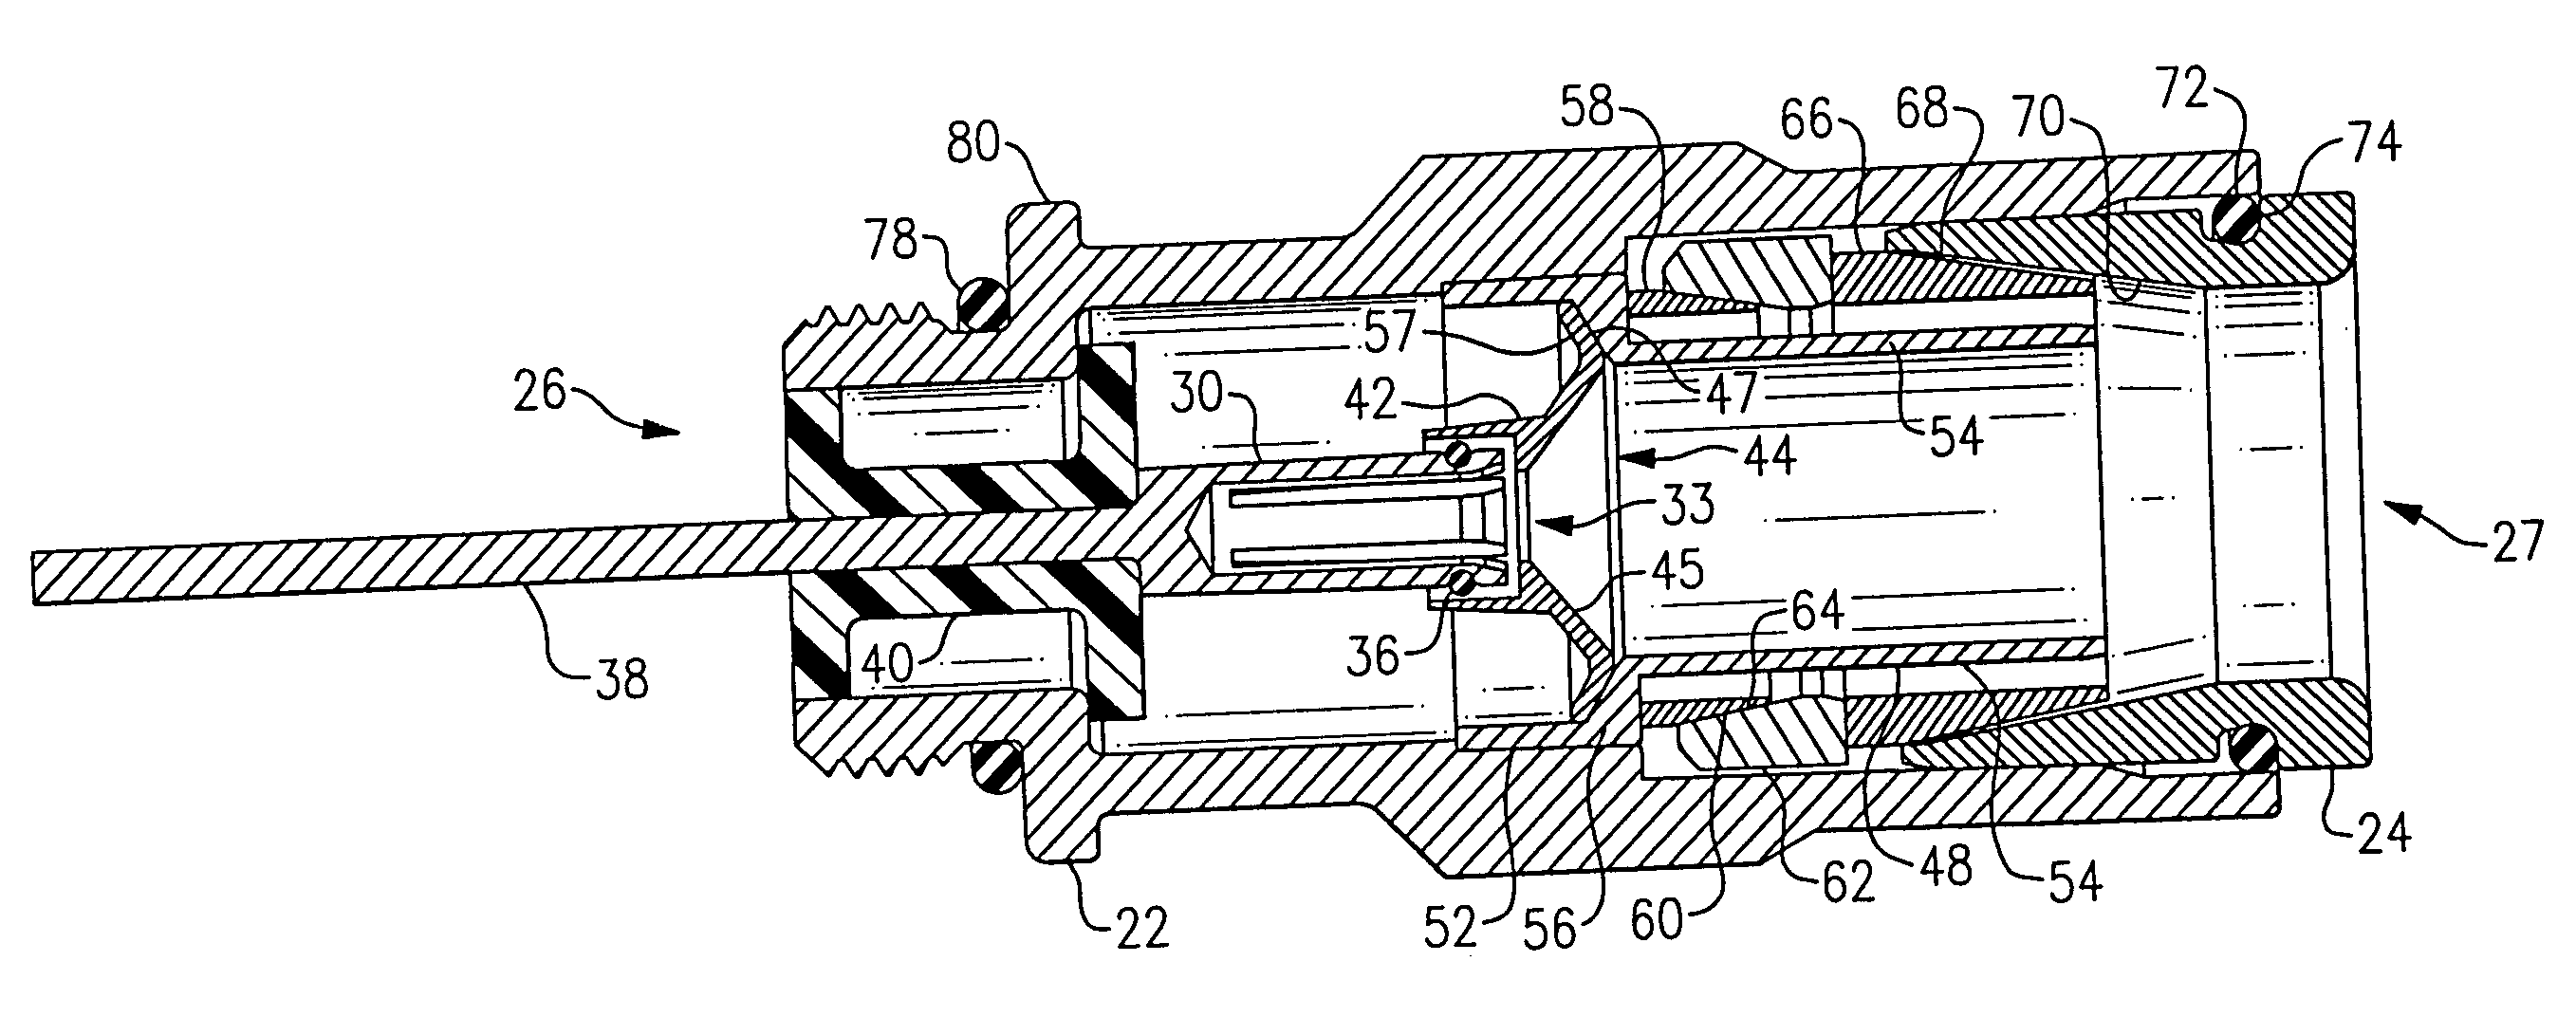 Apparatus for making permanent hardline connection